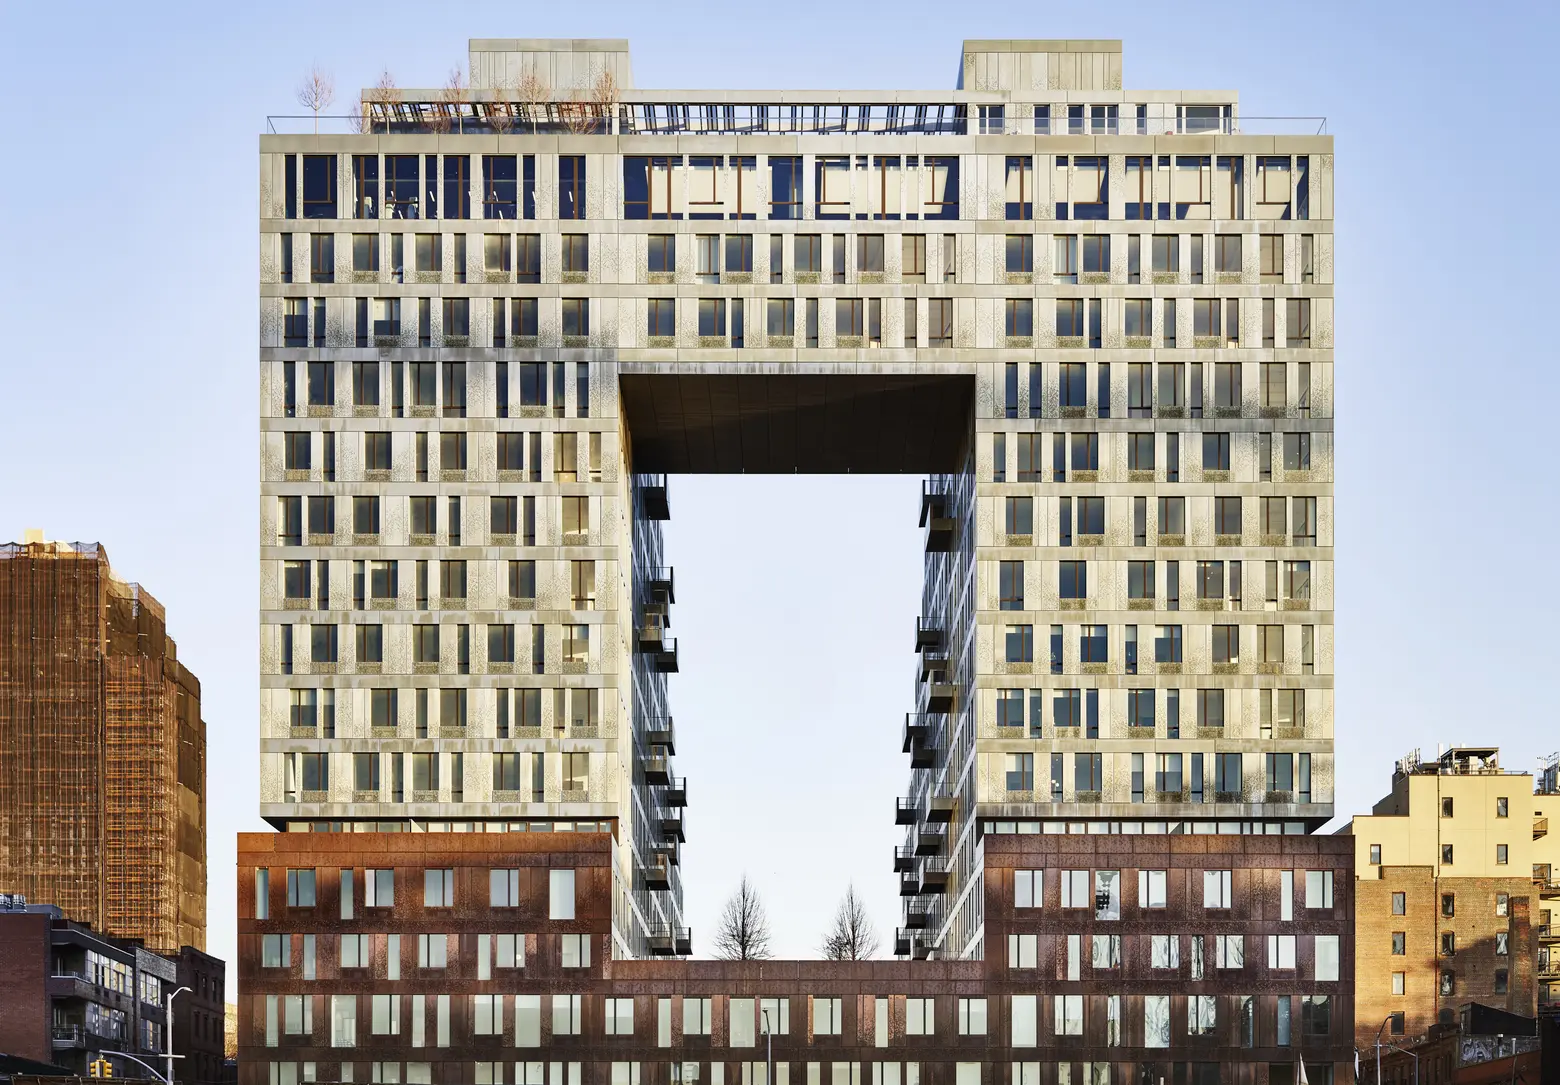 See new photos of SHoP Architects’ Domino rental tower at 325 Kent